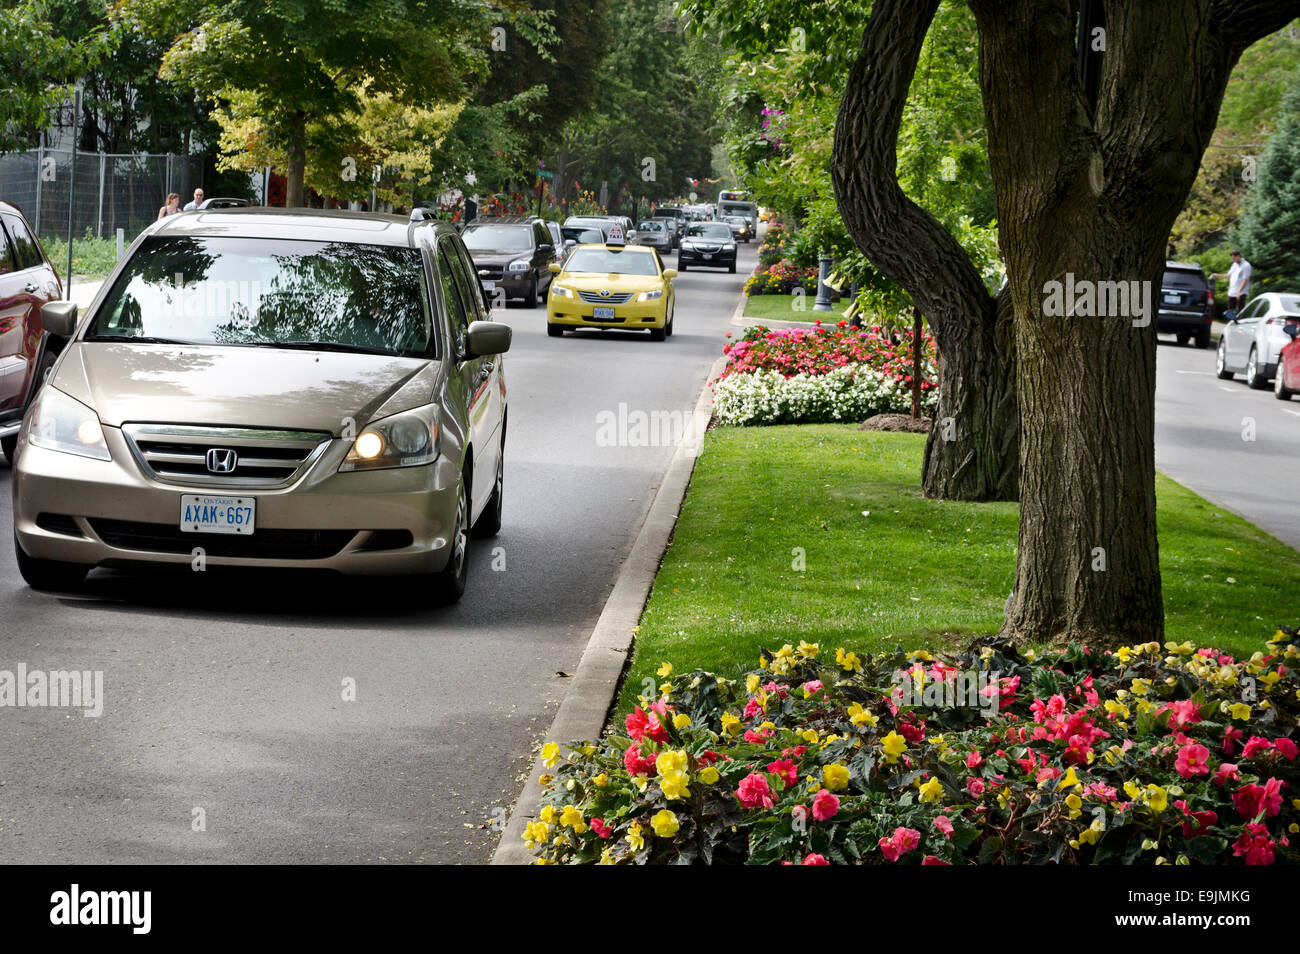 Cars and traffic during the busy summer tourist season in picturesque Niagara-On-the-Lake, Ontario, Canada. Stock Photo